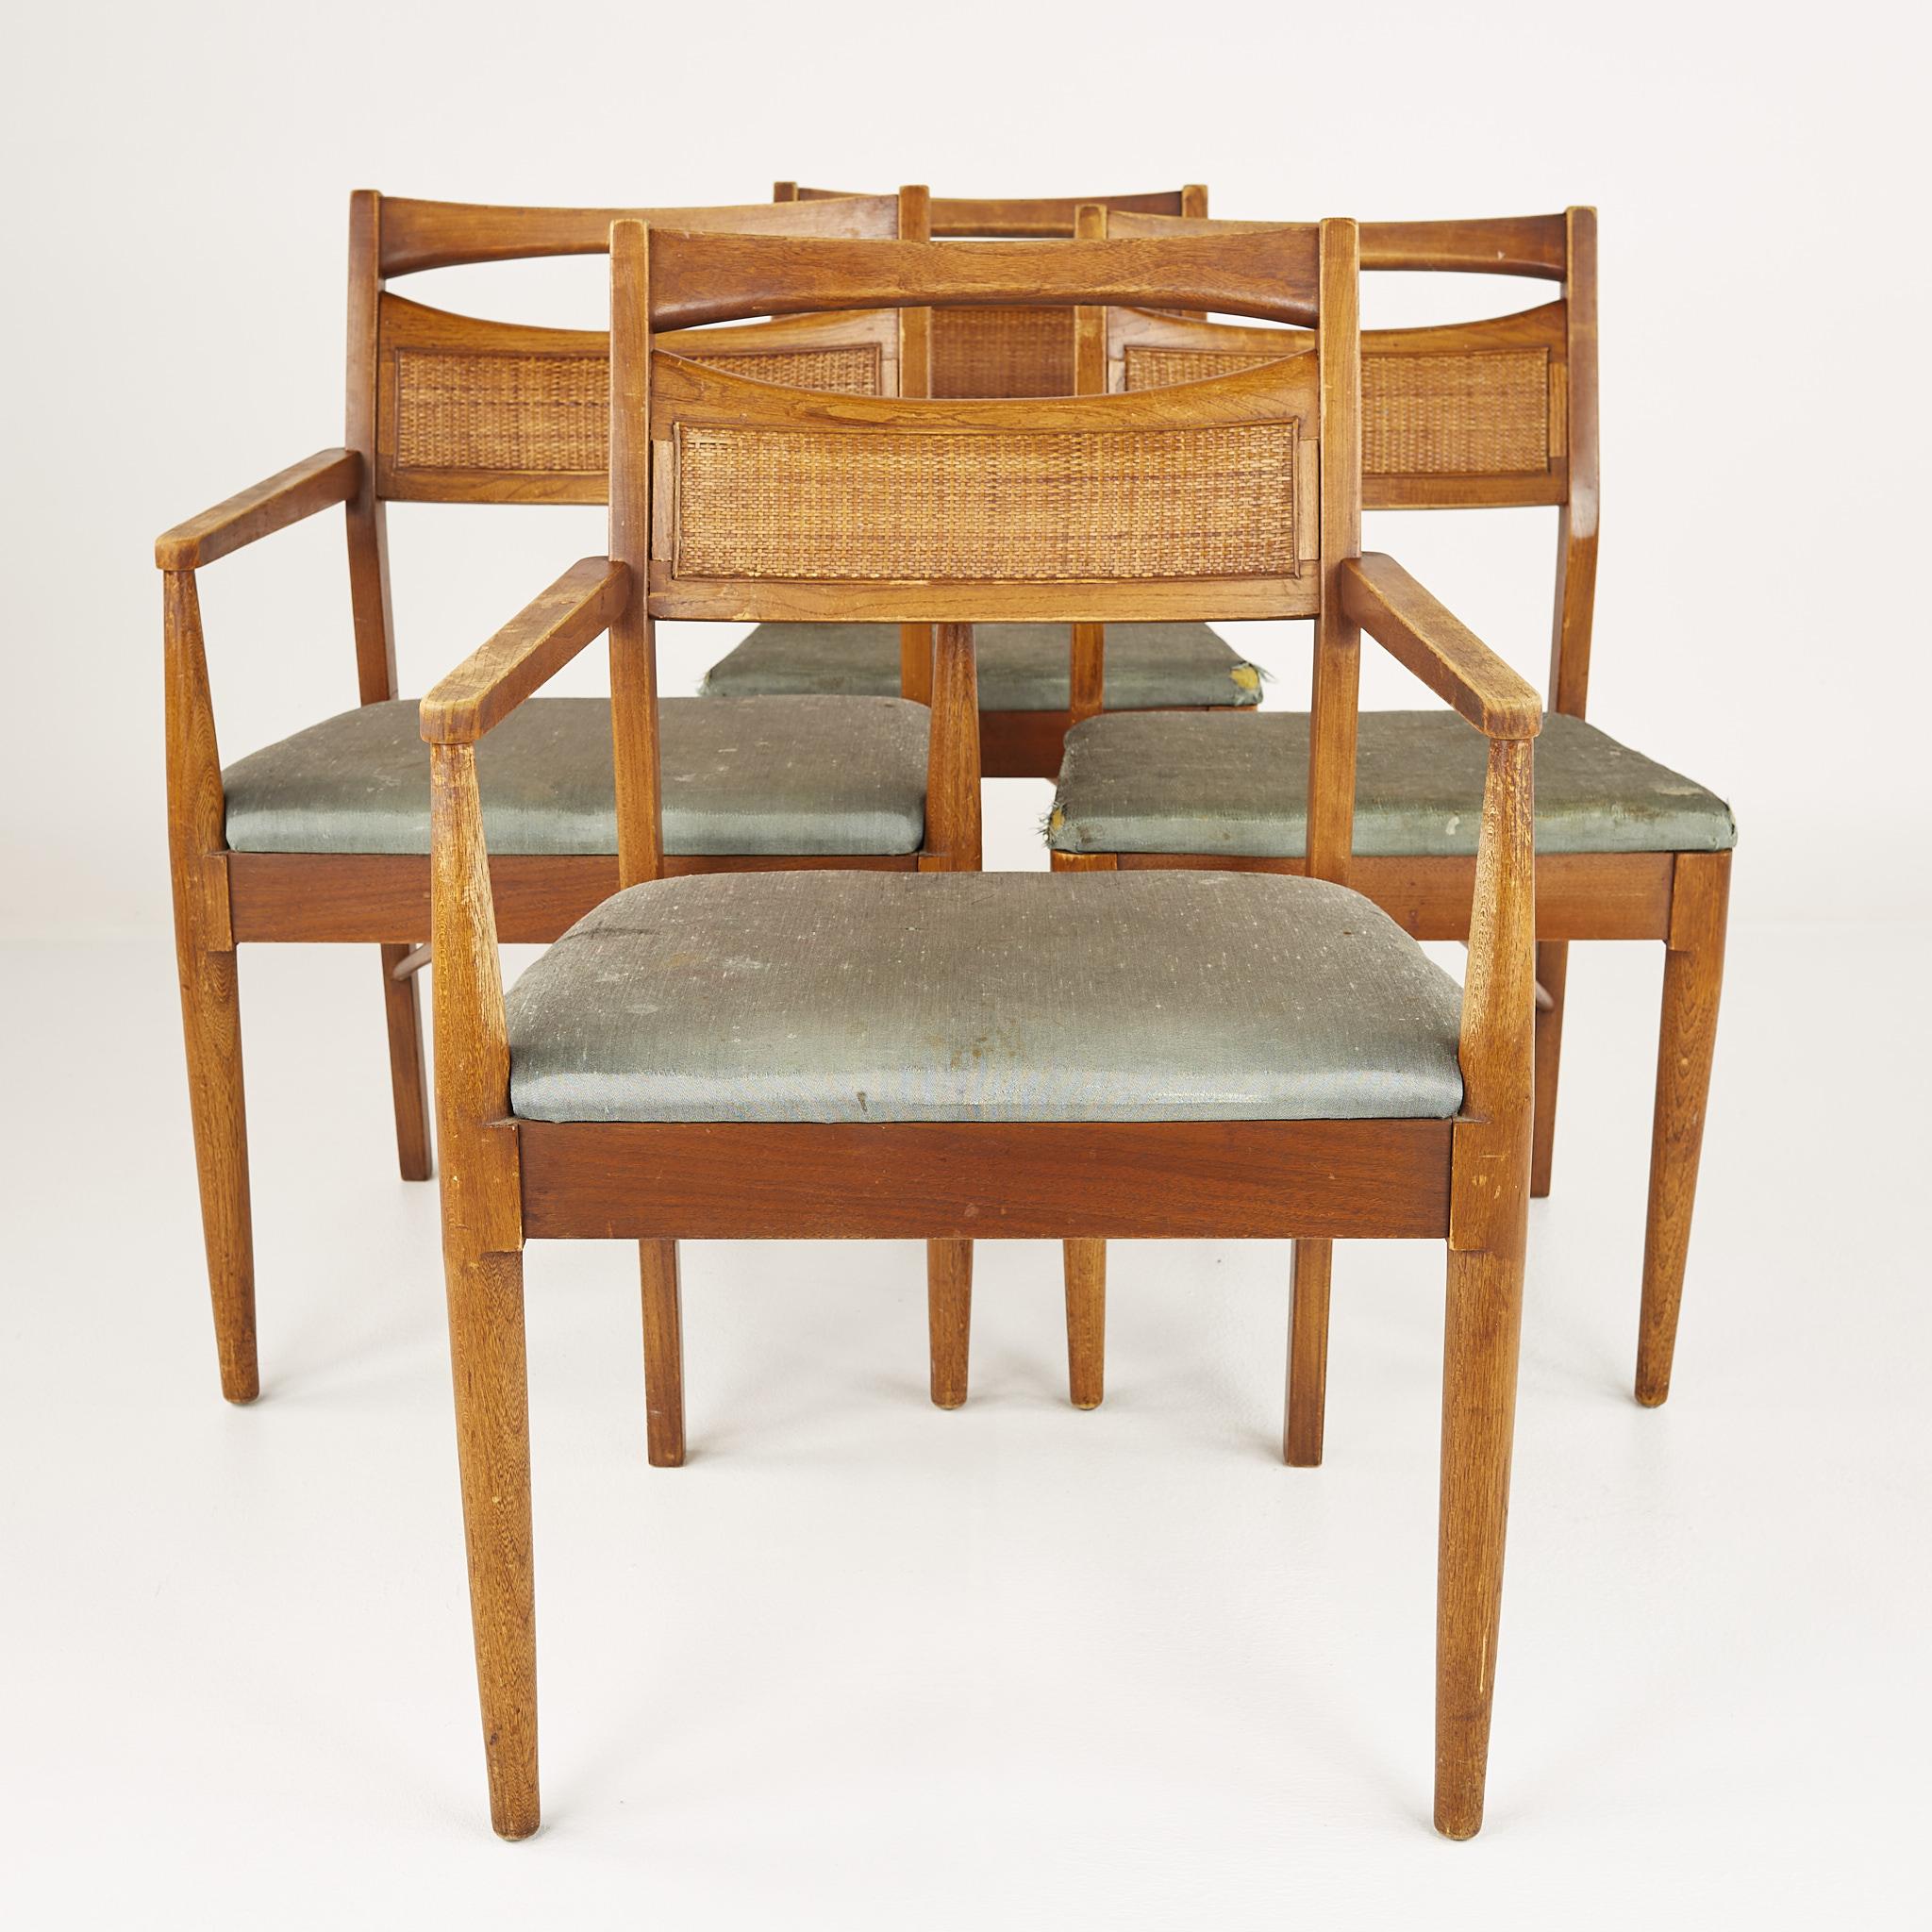 American of Martinsville mid century walnut and cane back dining chairs - set of 4

These chairs measure: 22.25 wide x 21.25 deep x 33.75 inches high, with a seat height of 17.75 and an arm height of 25.25 inches

?All pieces of furniture can be